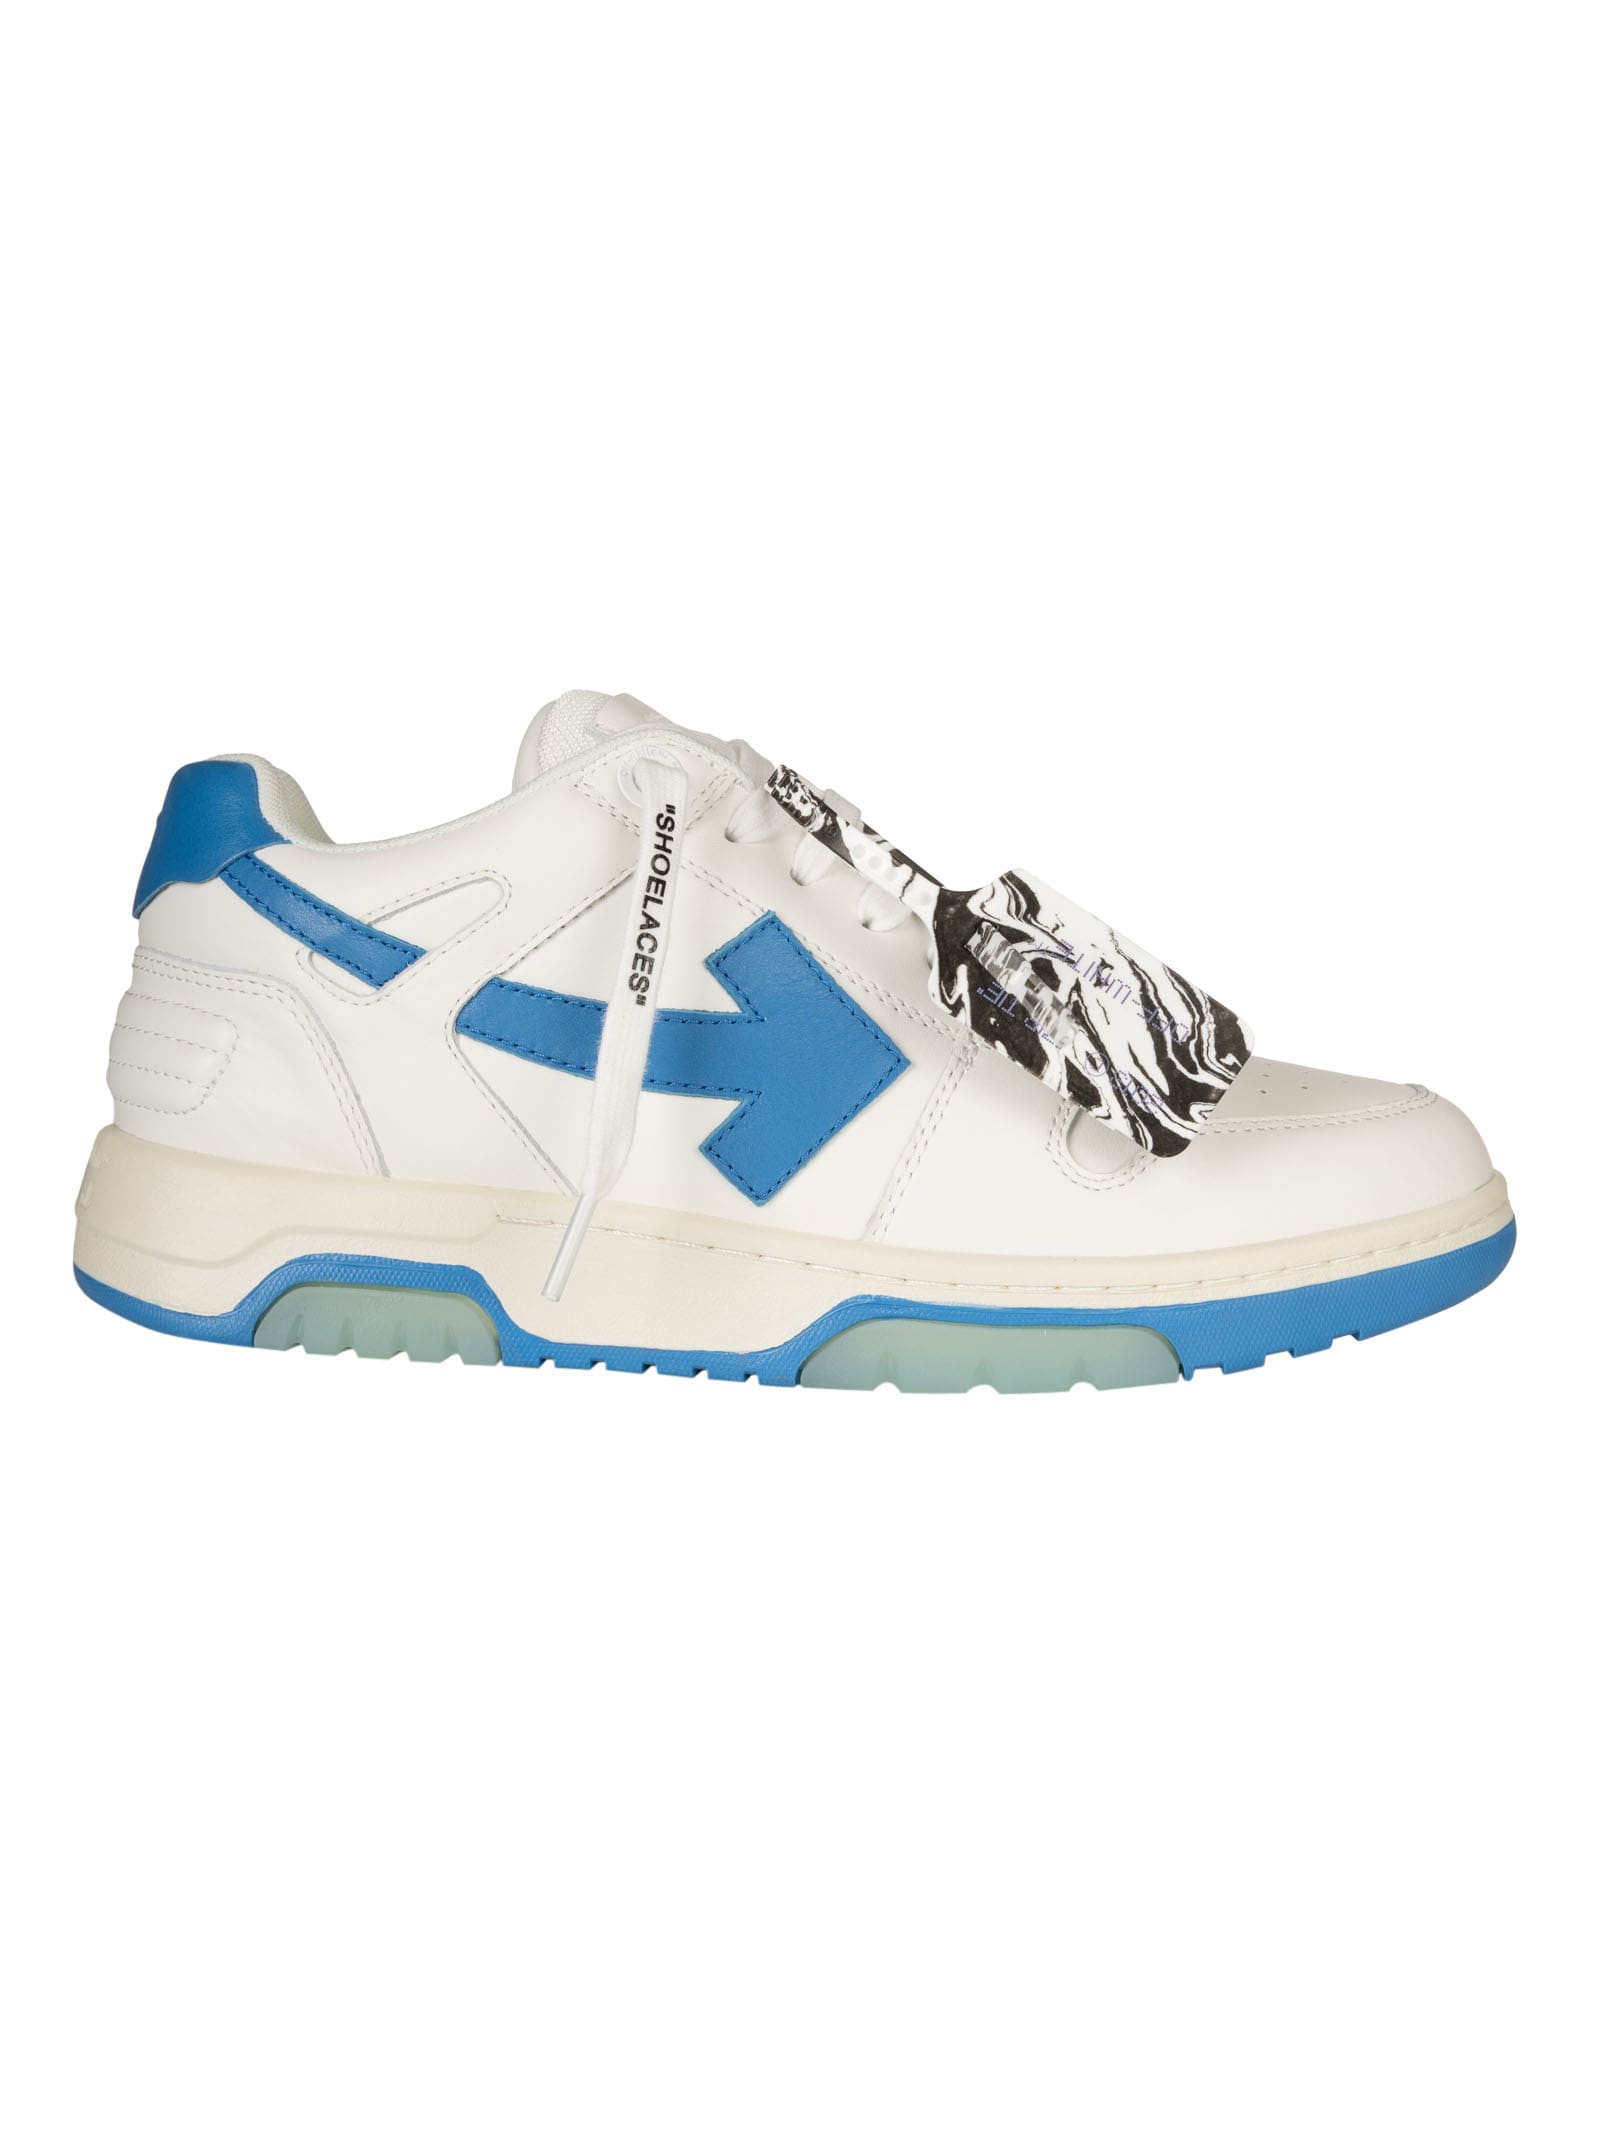 OFF-WHITE OUT OF OFFICE WALKING CALF trainers,OMIA189R21LEA001 0145 WHITE BLUE